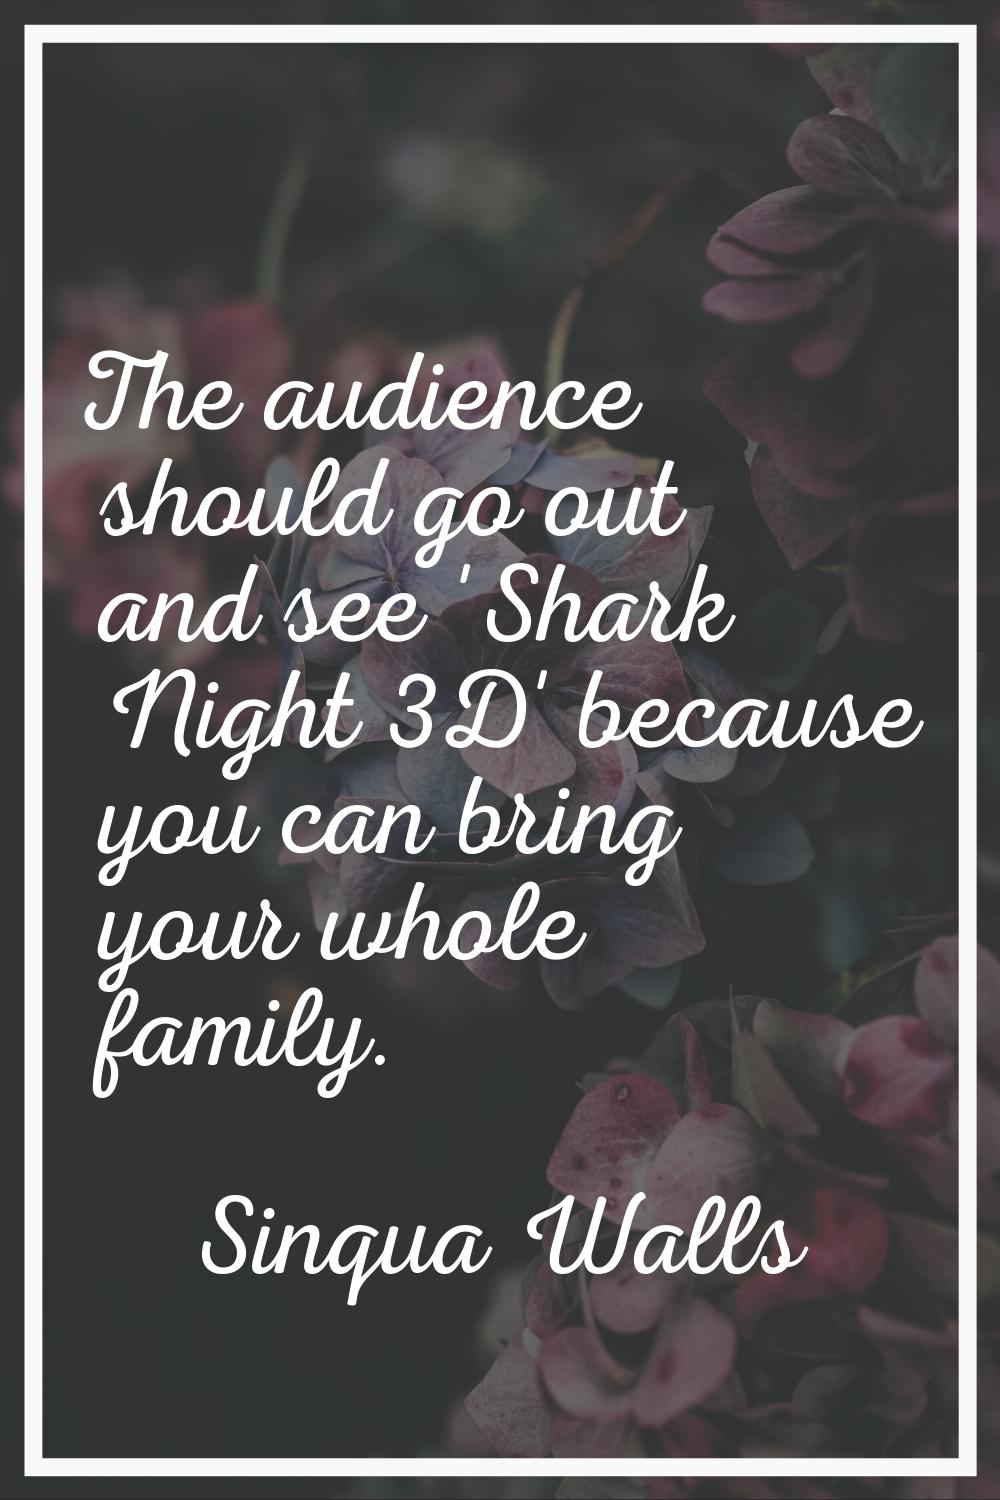 The audience should go out and see 'Shark Night 3D' because you can bring your whole family.